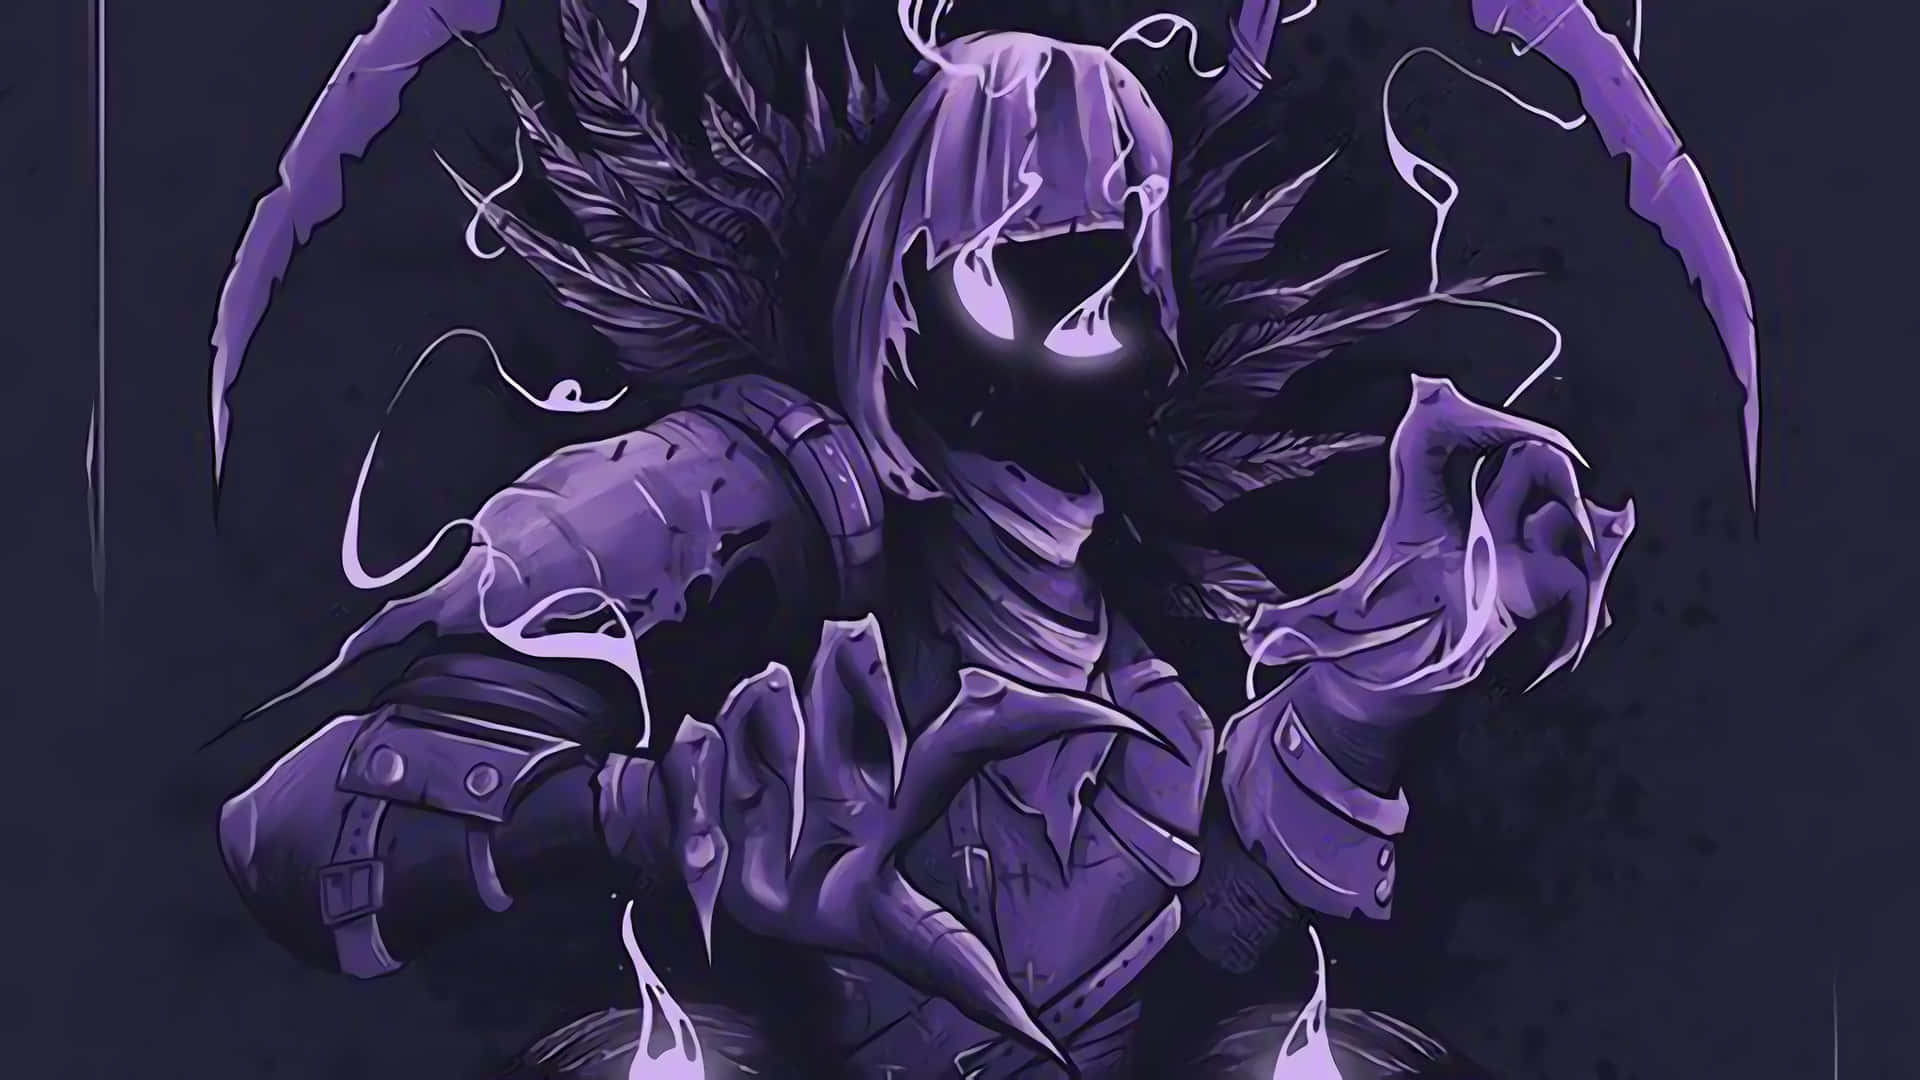 Fly high with Raven, the new skin from Fortnite Wallpaper